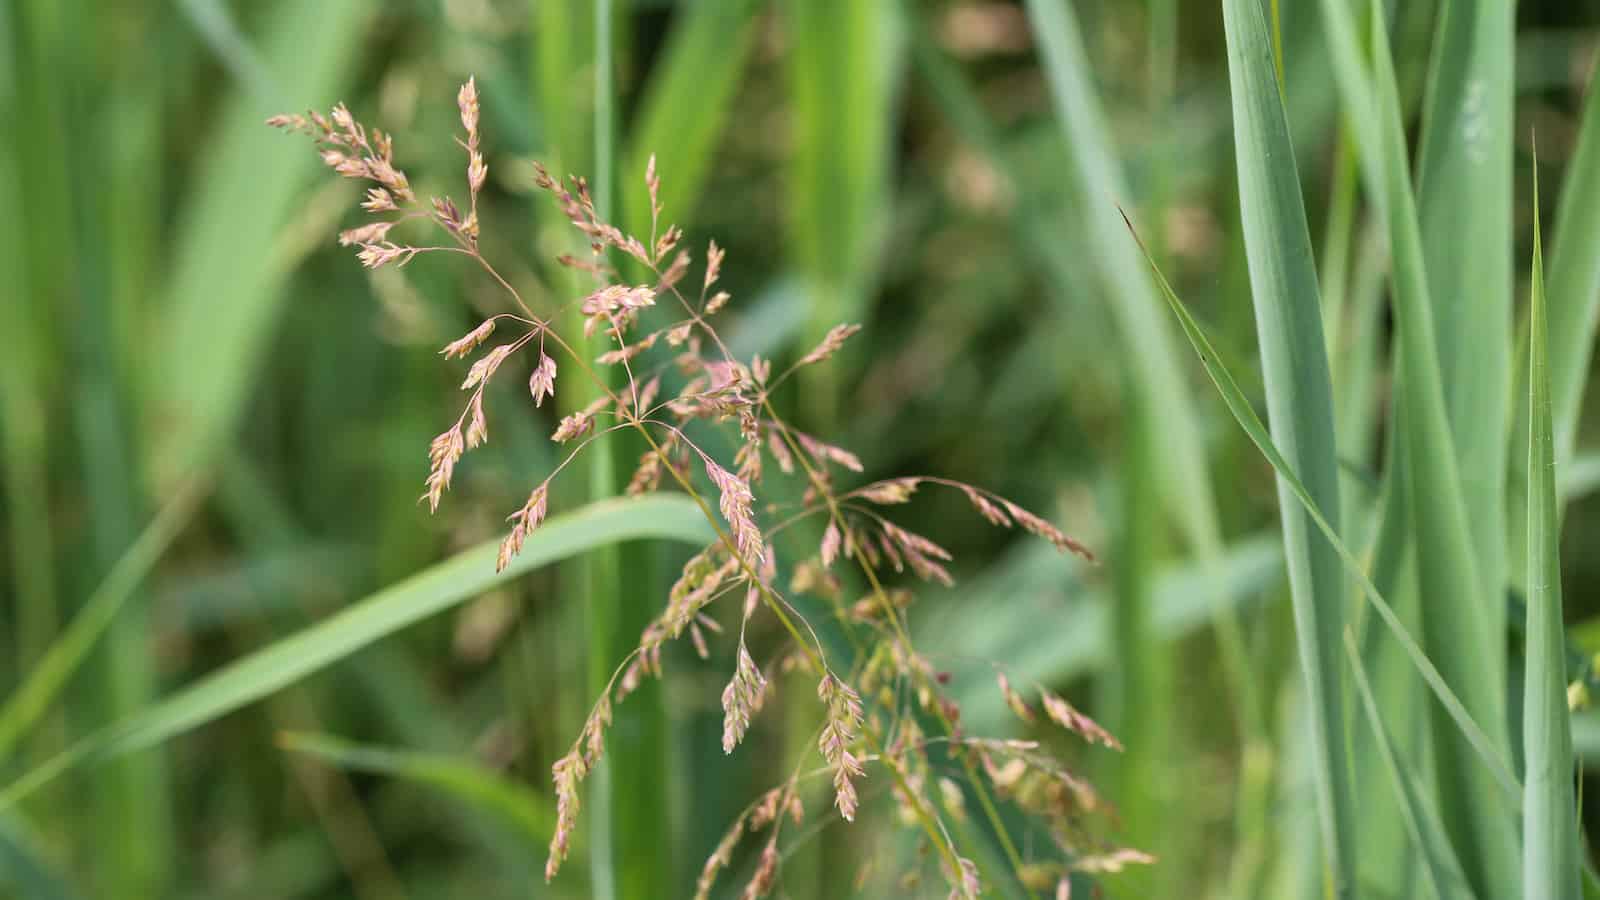 Poa pratensis, commonly known as Kentucky bluegrass, blue grass, smooth meadow grass, or common meadow grass